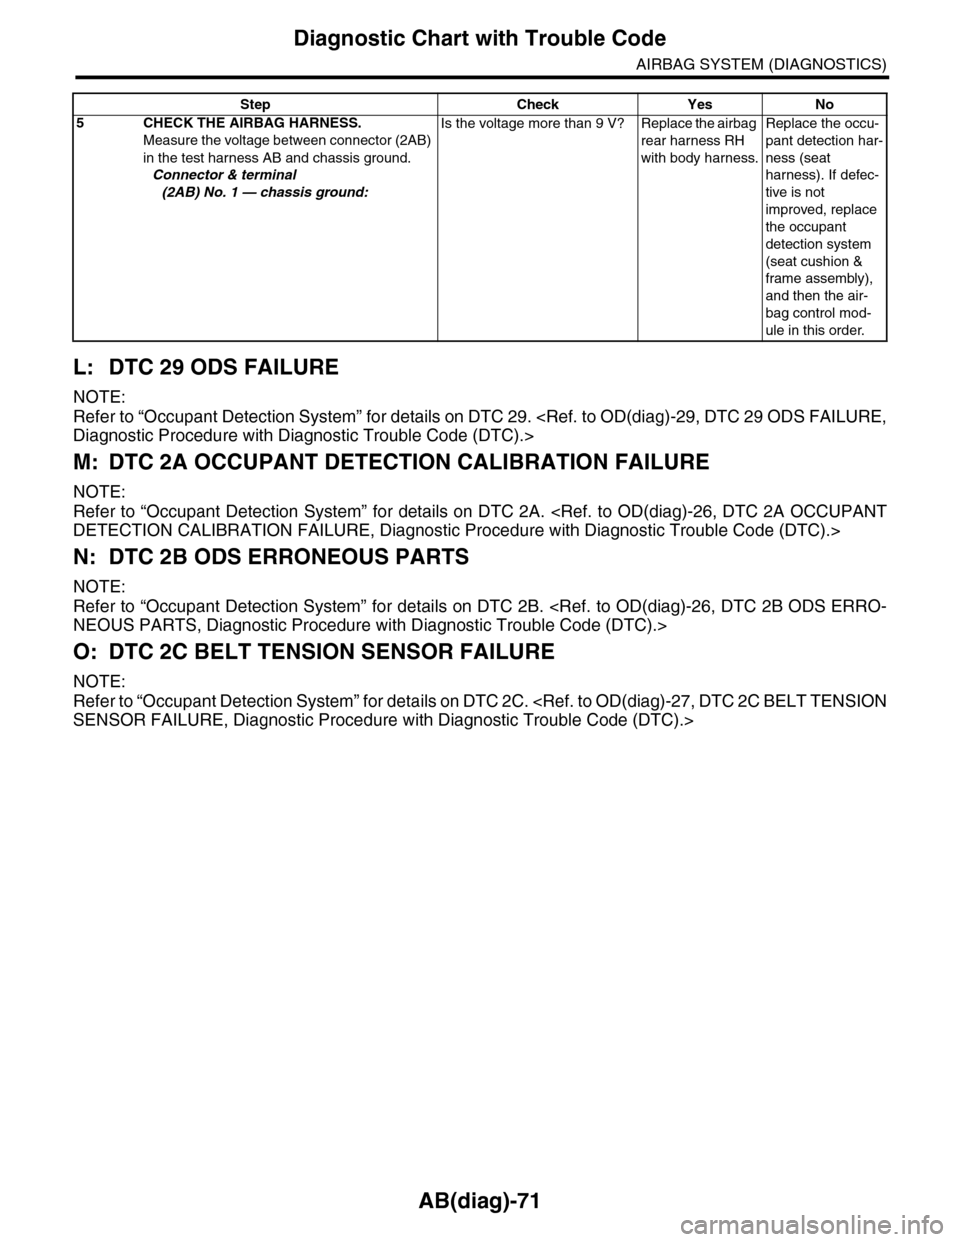 SUBARU TRIBECA 2009 1.G Service Owners Manual AB(diag)-71
Diagnostic Chart with Trouble Code
AIRBAG SYSTEM (DIAGNOSTICS)
L: DTC 29 ODS FAILURE
NOTE:
Refer to “Occupant Detection System” for details on DTC 29. <Ref. to OD(diag)-29, DTC 29 ODS 